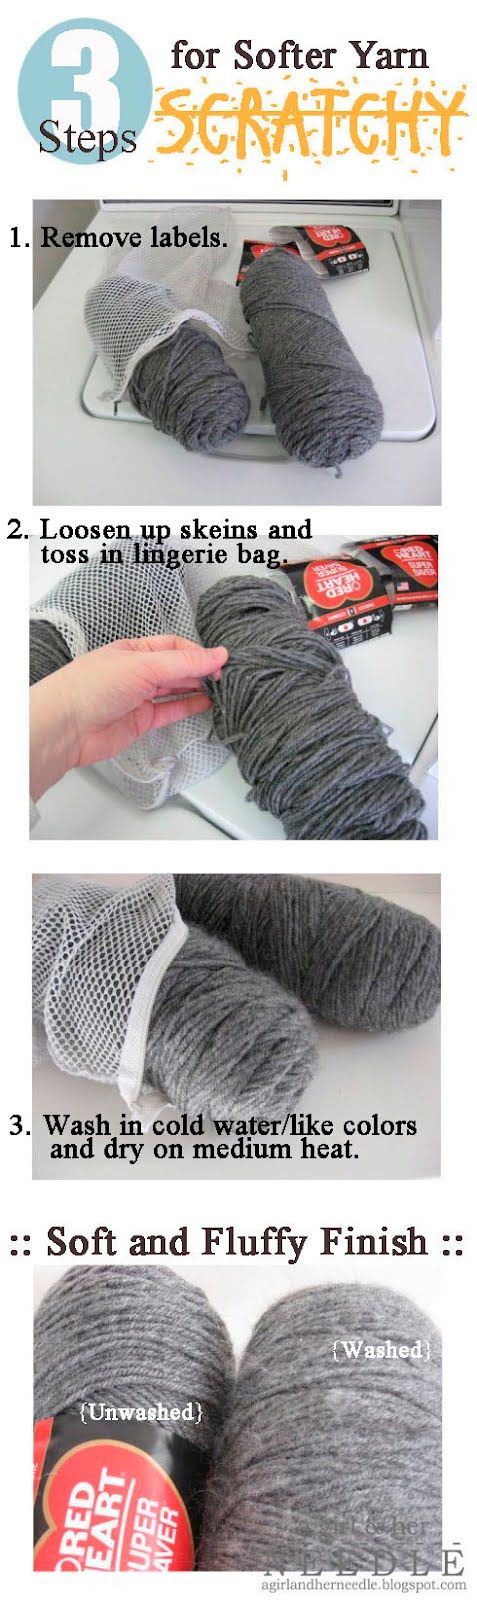 3 Steps for softer yarn.  Simply wash it in a lingerie bag!